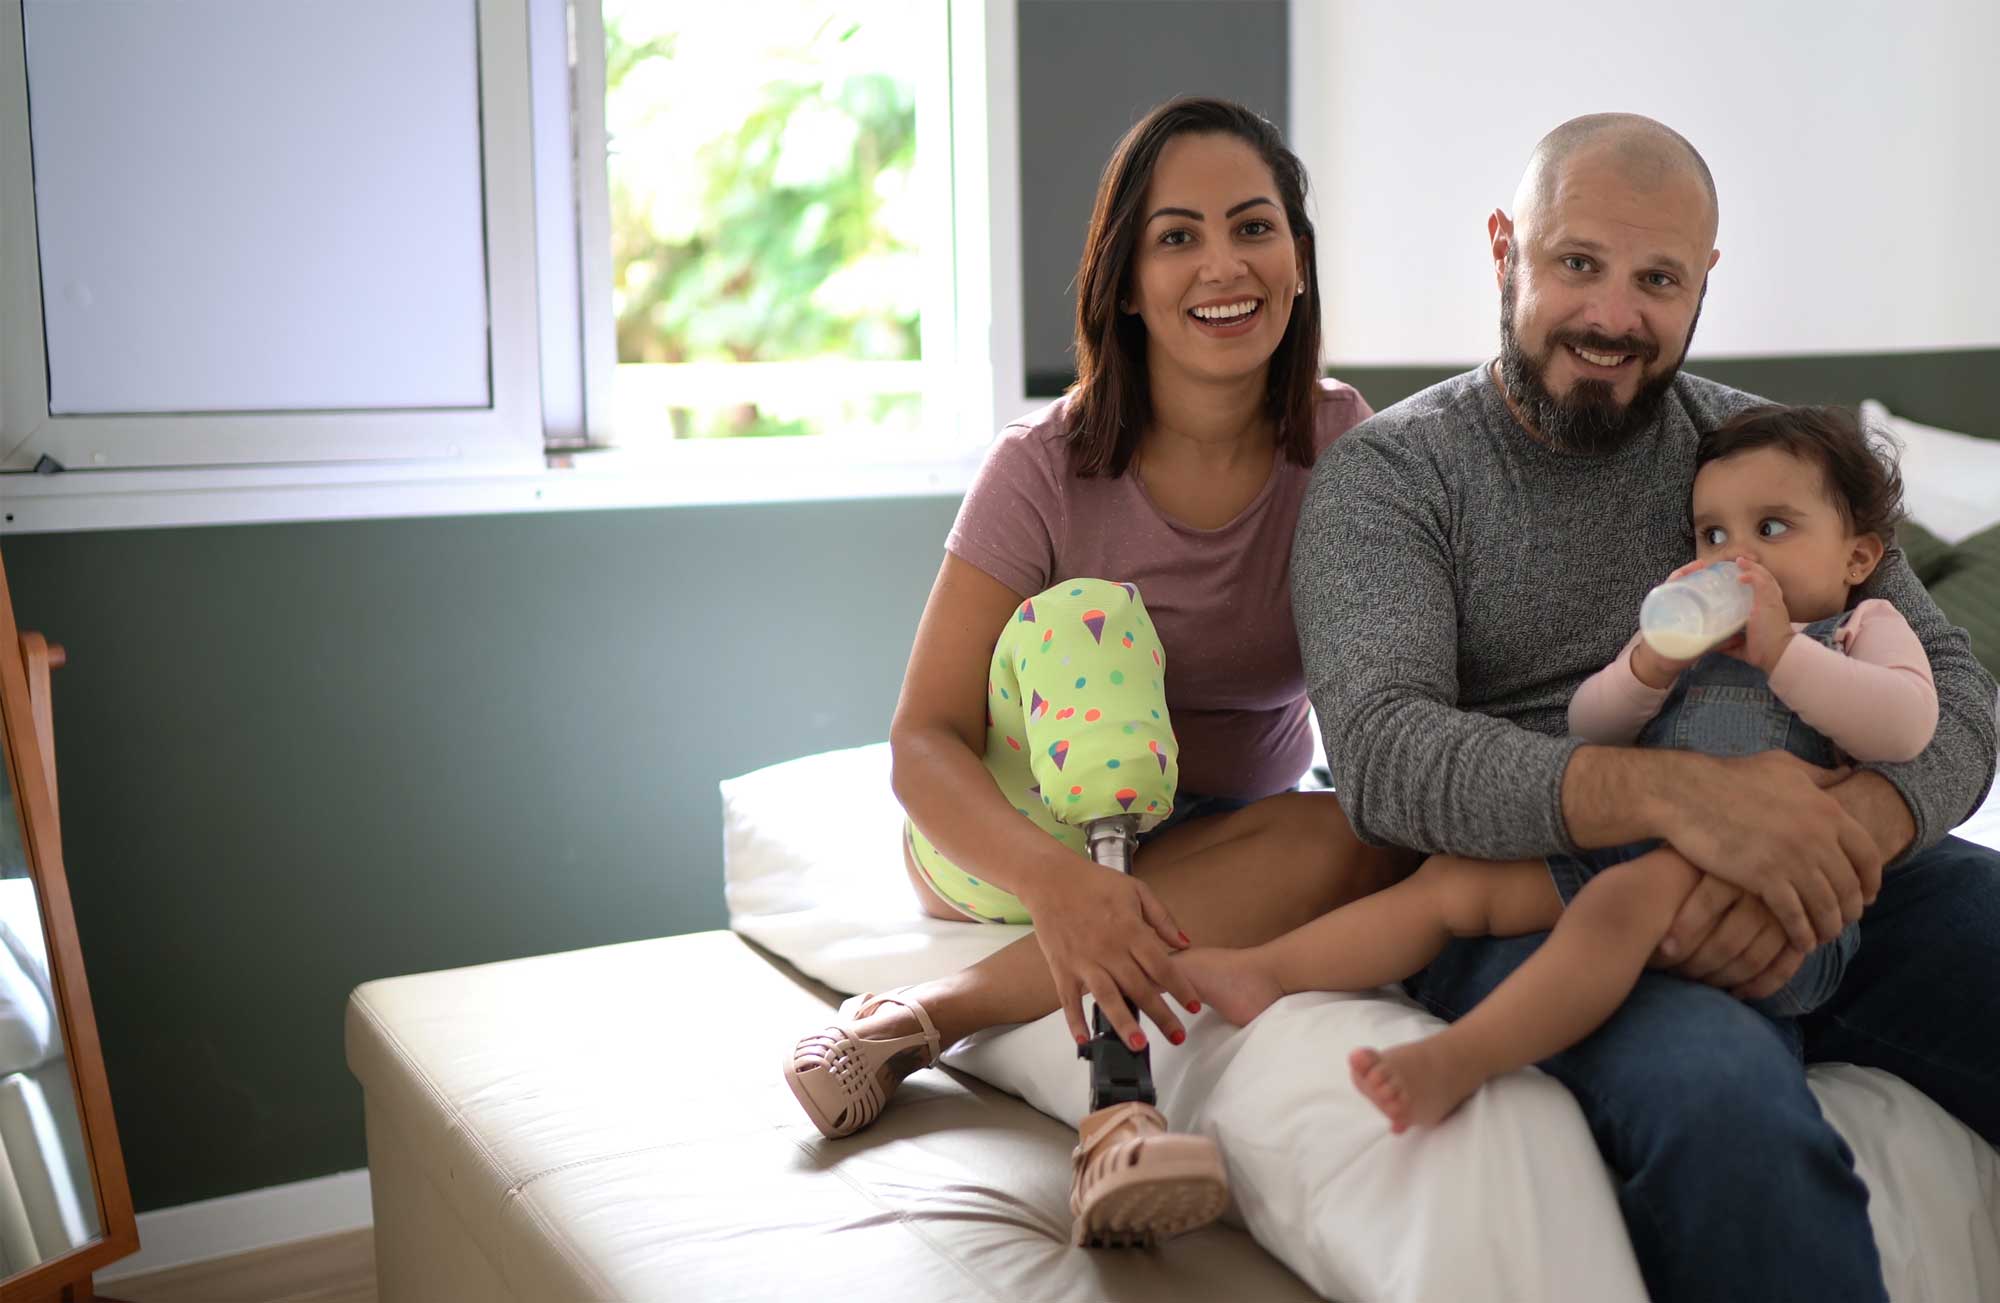 a photo of a family: a mom who has a prosthetic leg, her husband and their infant